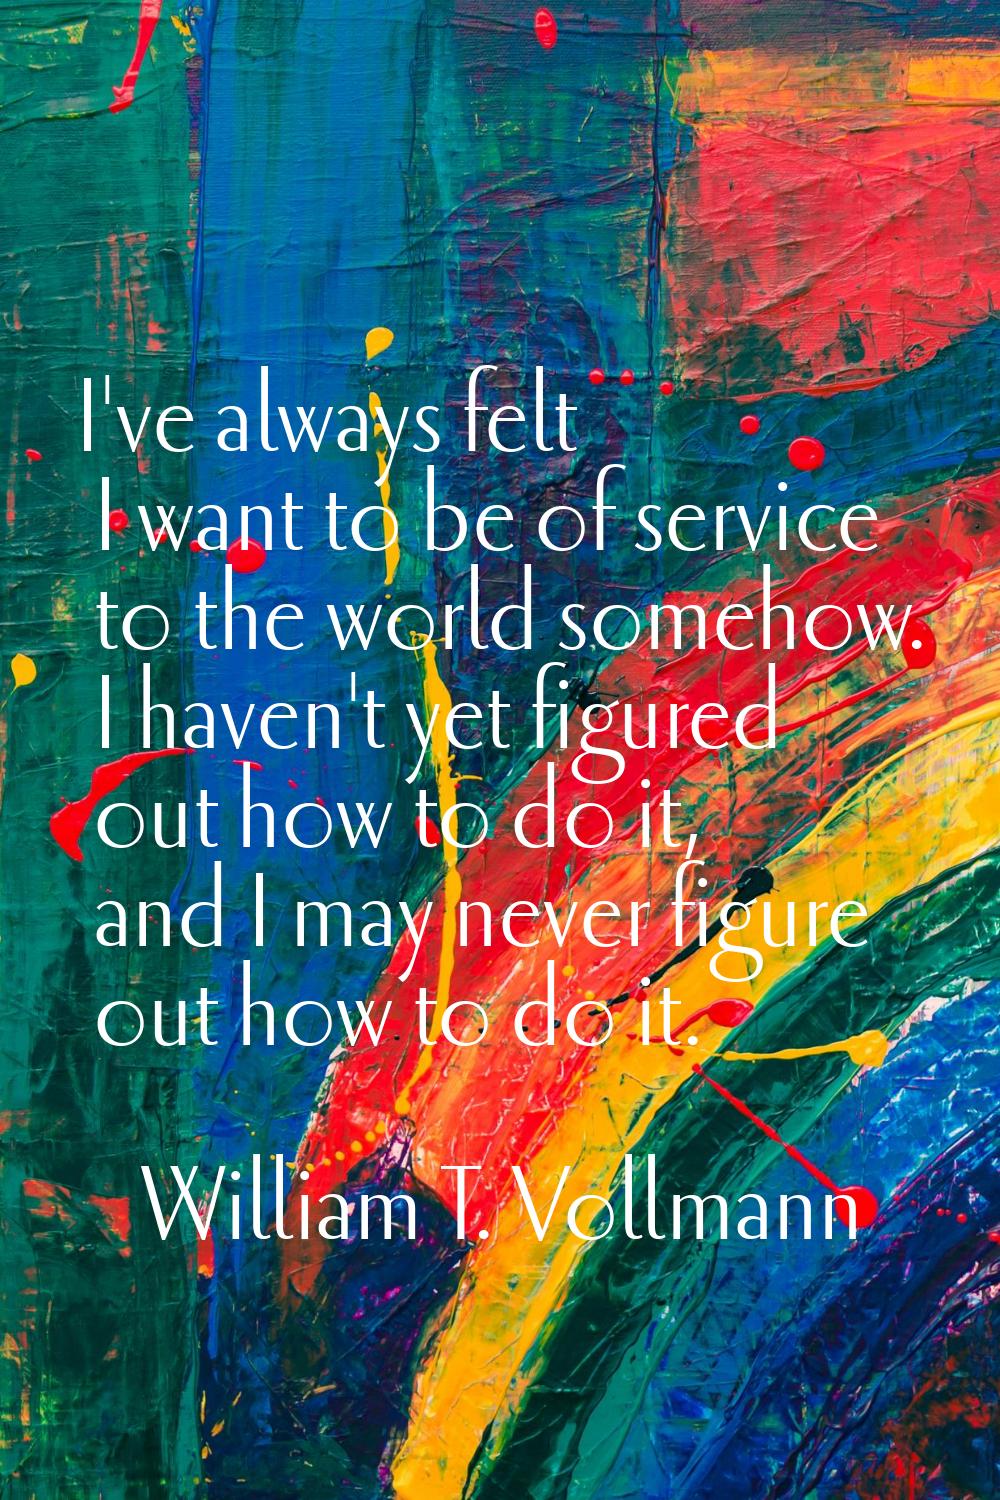 I've always felt I want to be of service to the world somehow. I haven't yet figured out how to do 